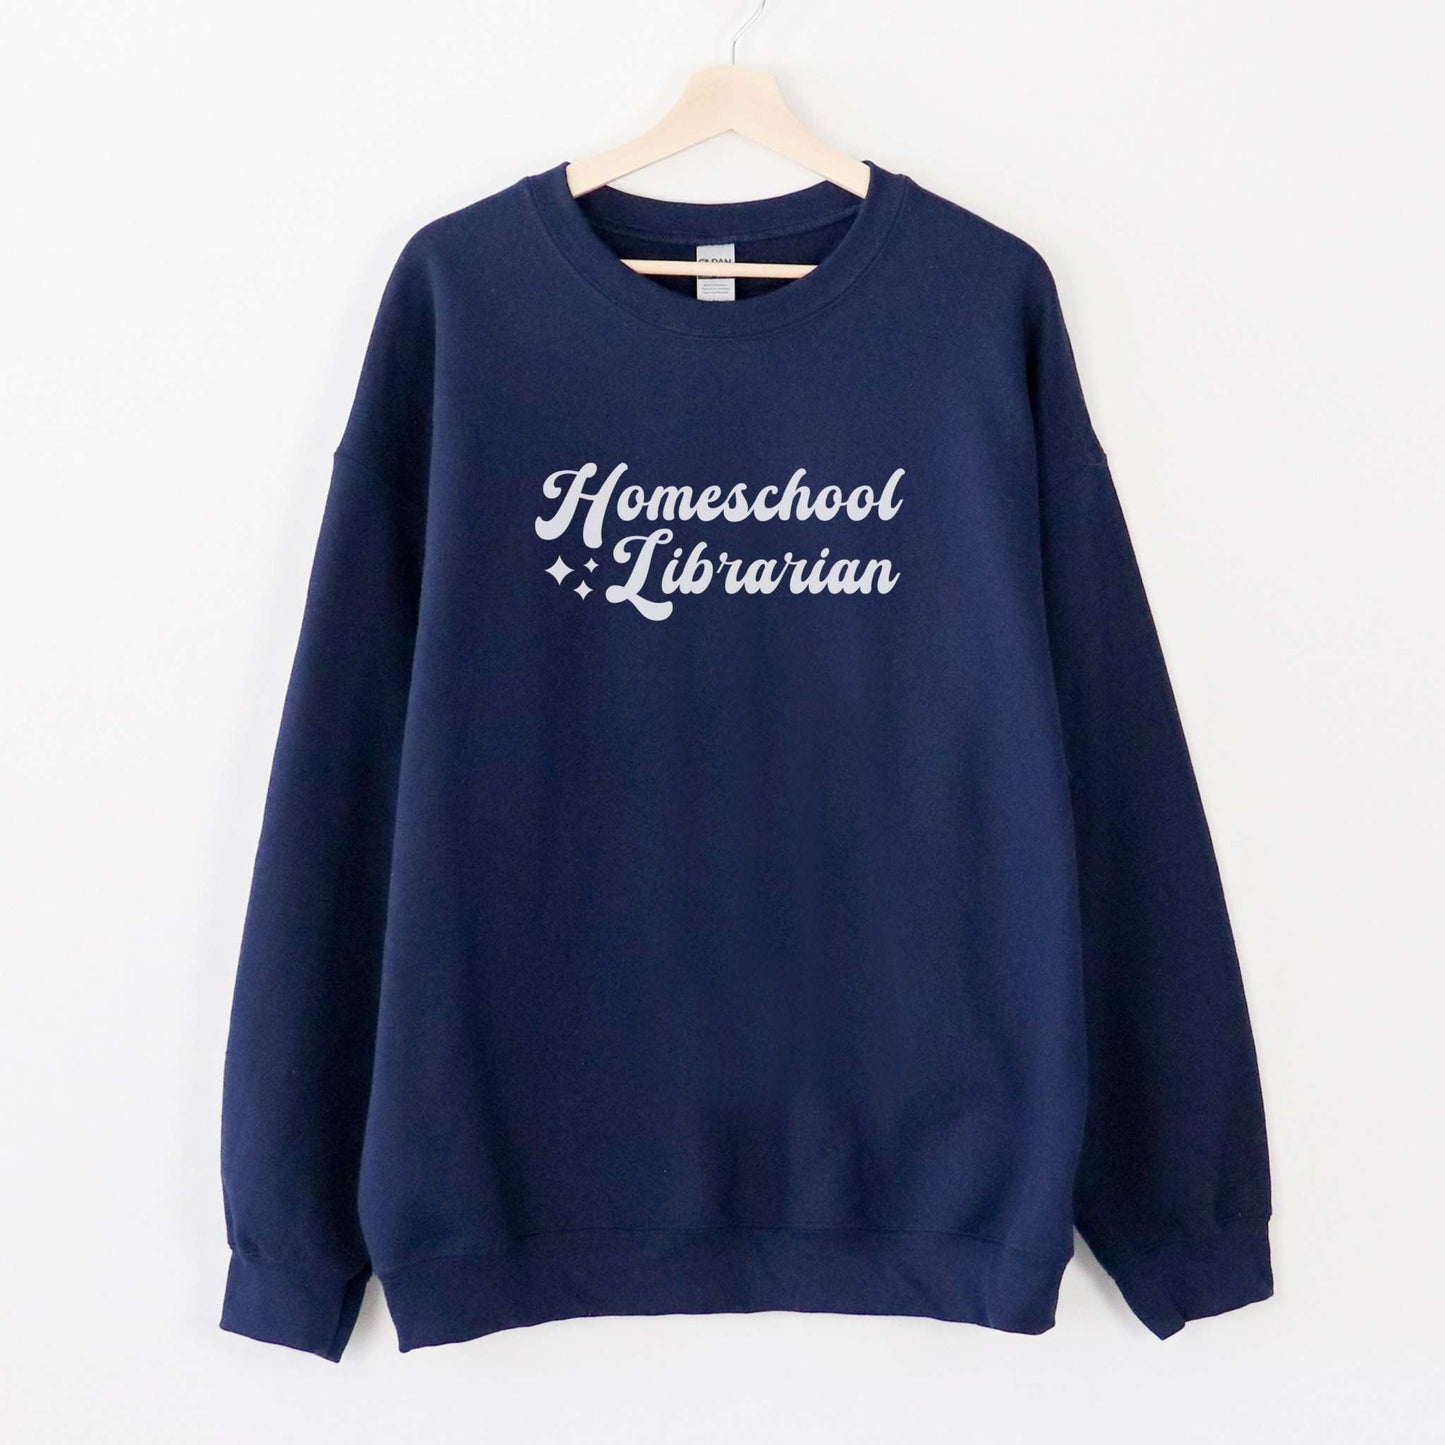 Homeschool Librarian Crewneck SweatshirtWolfe Paw DesignsHomeschool Librarian Crewneck SweatshirtJust one more book won't hurt, right?
Available in Adult t-shirt
Gildan Unisex Fit
50% cotton, 50% polyesterMedium-heavy fabricLoose fit



 
S
M
L
XL
2XL
3XL
4XL
5XHomeschool Librarian Crewneck Sweatshirt